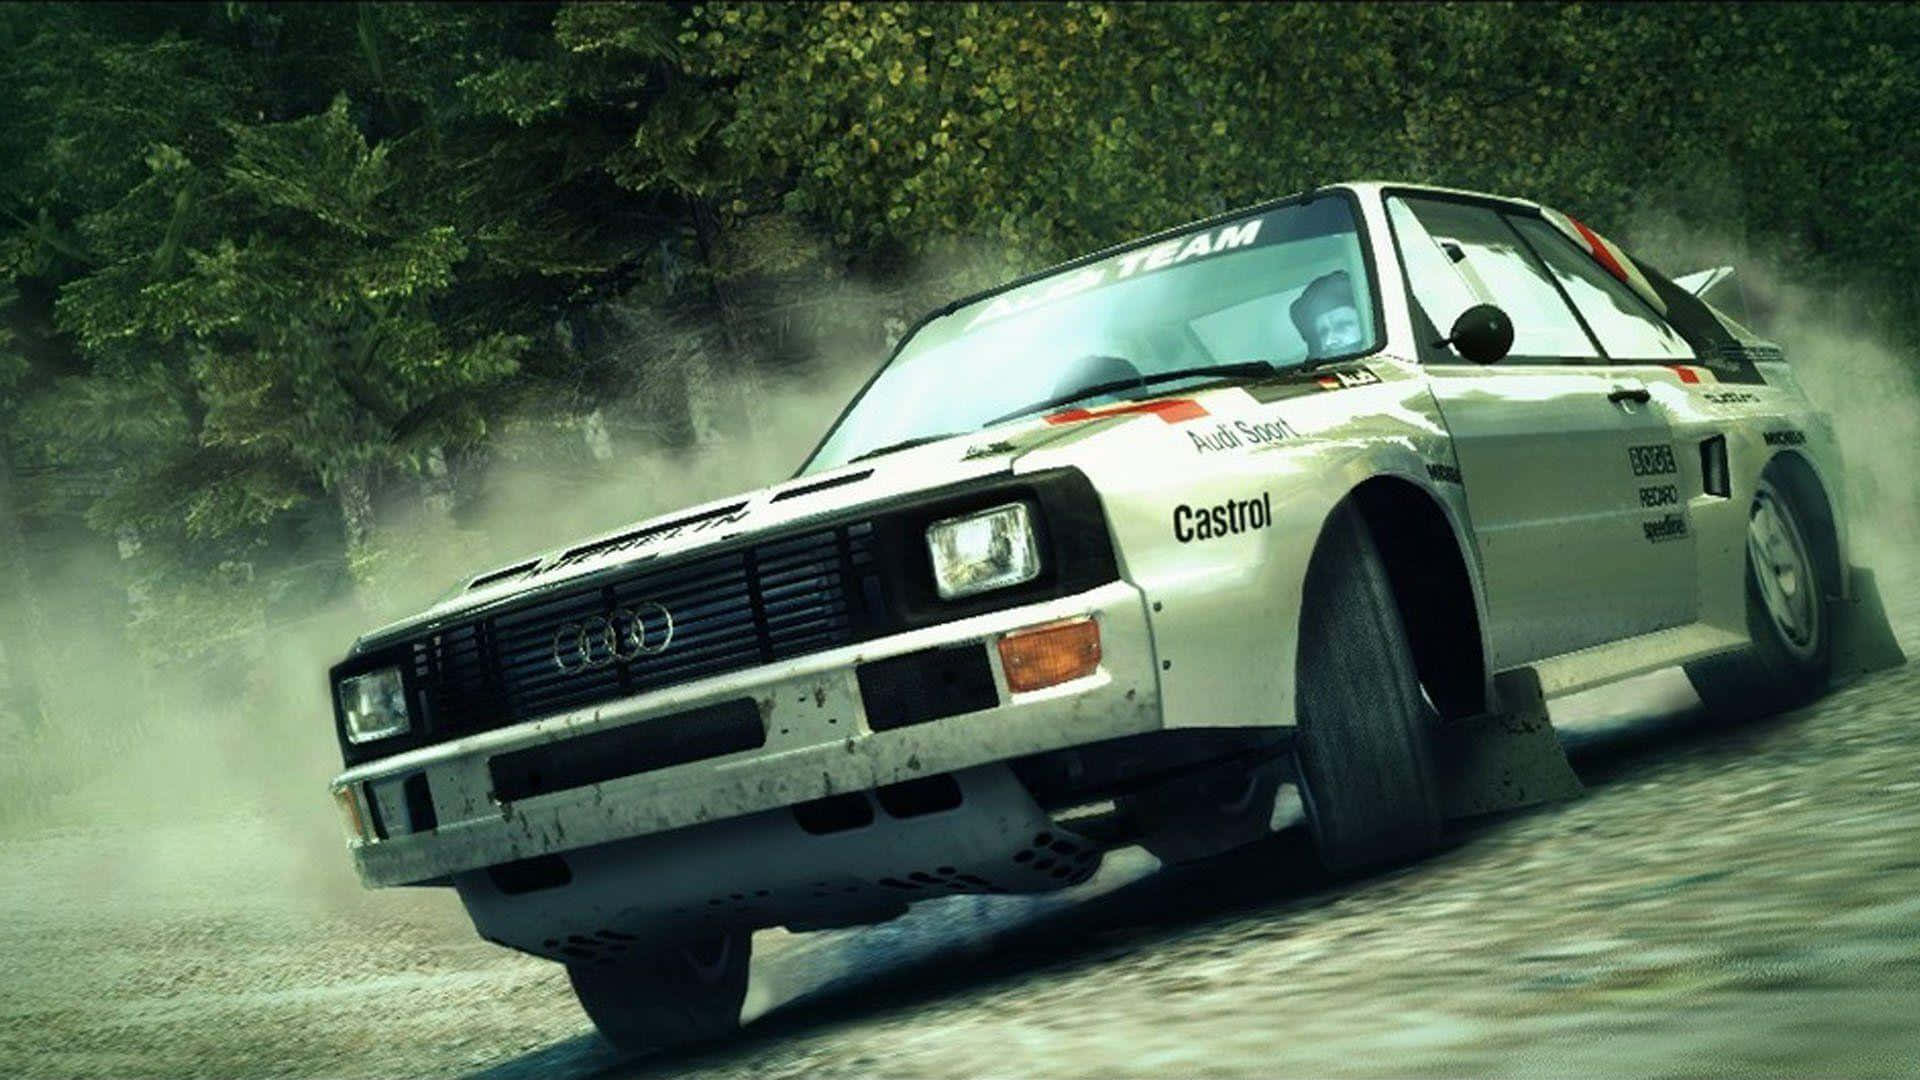 Get your heart pumping as you race your way across varied European locales in Dirt 3.